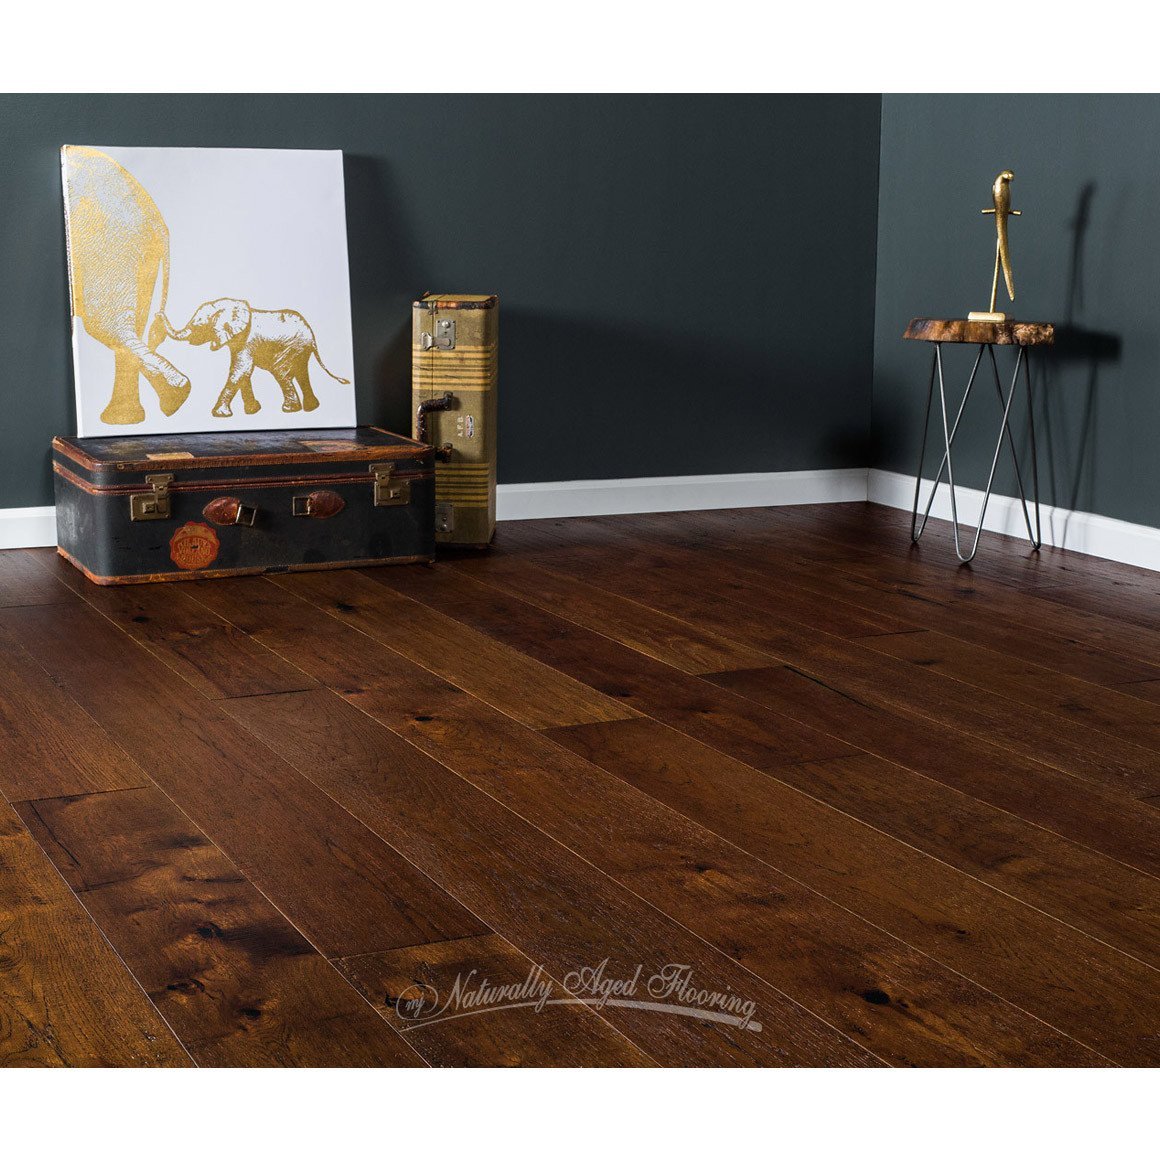 Naturally Aged Flooring Medallion Collection Lost Canyon Lifestyle